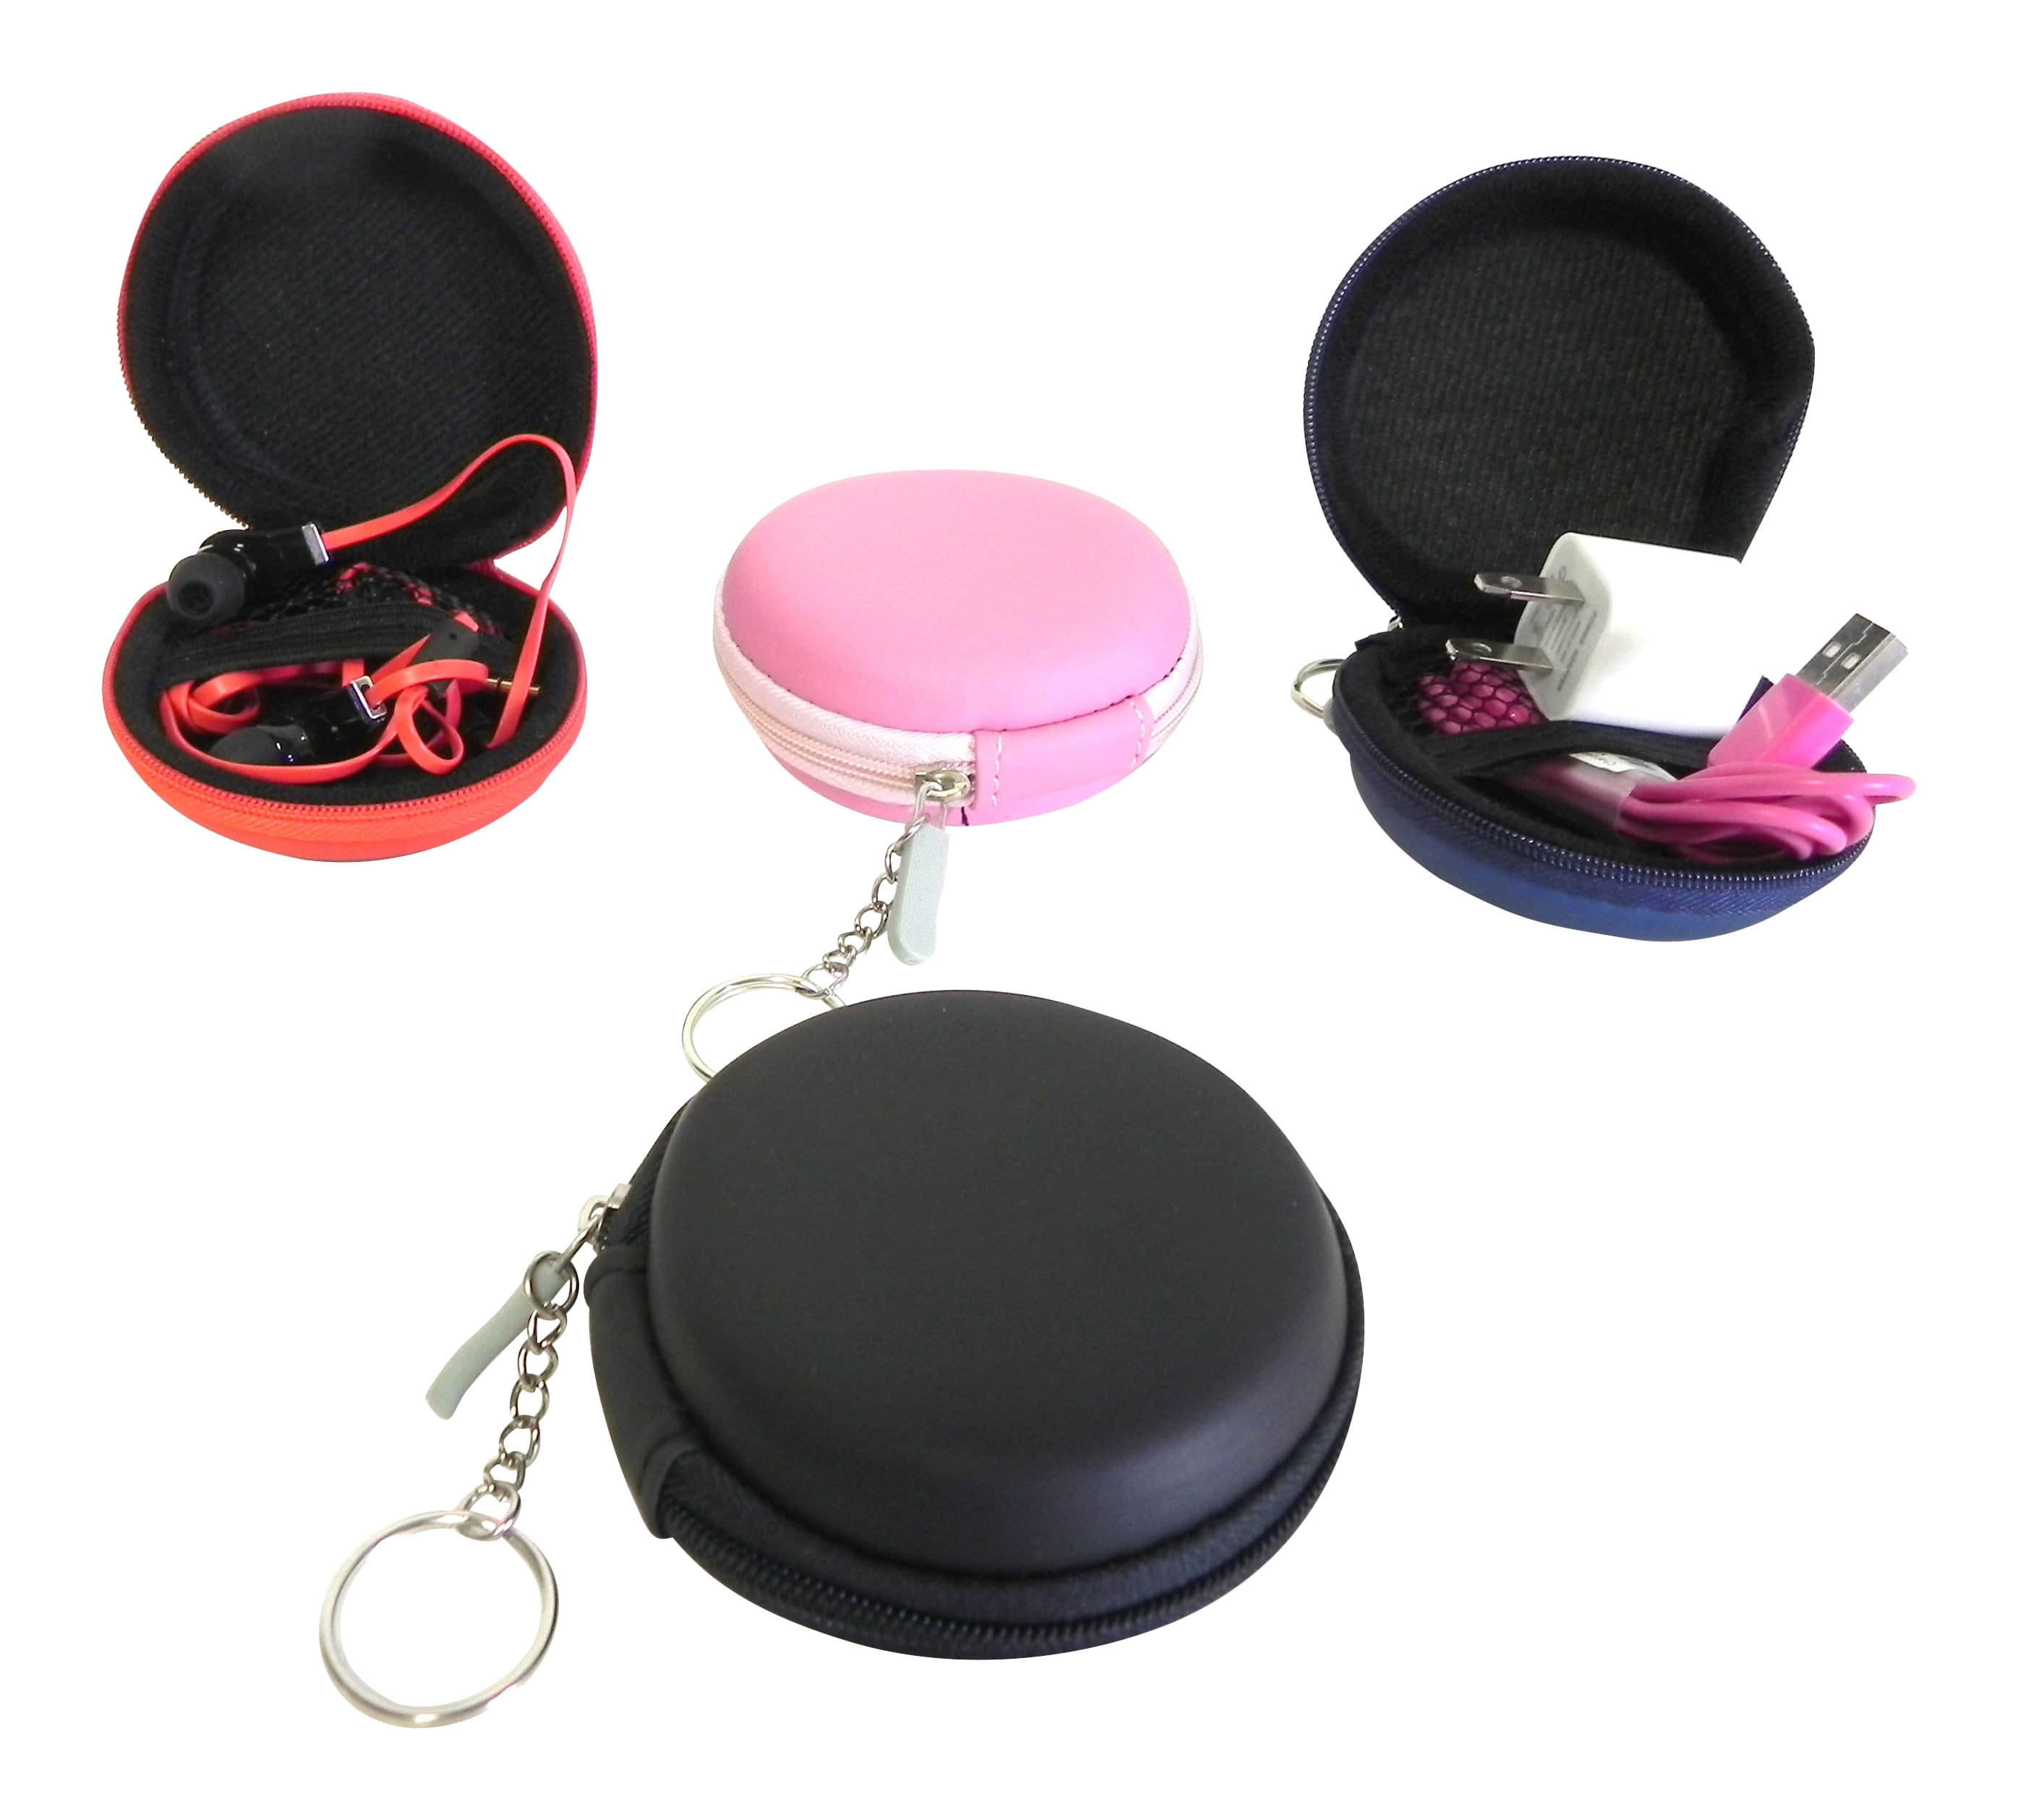 Color : Camouflage Pink YSYYSH Headset Set Wireless Bluetooth Headset Hard Silicone Storage Box Color Dustproof Shock Protection Cover Three Colors to Choose from Portable Earphone